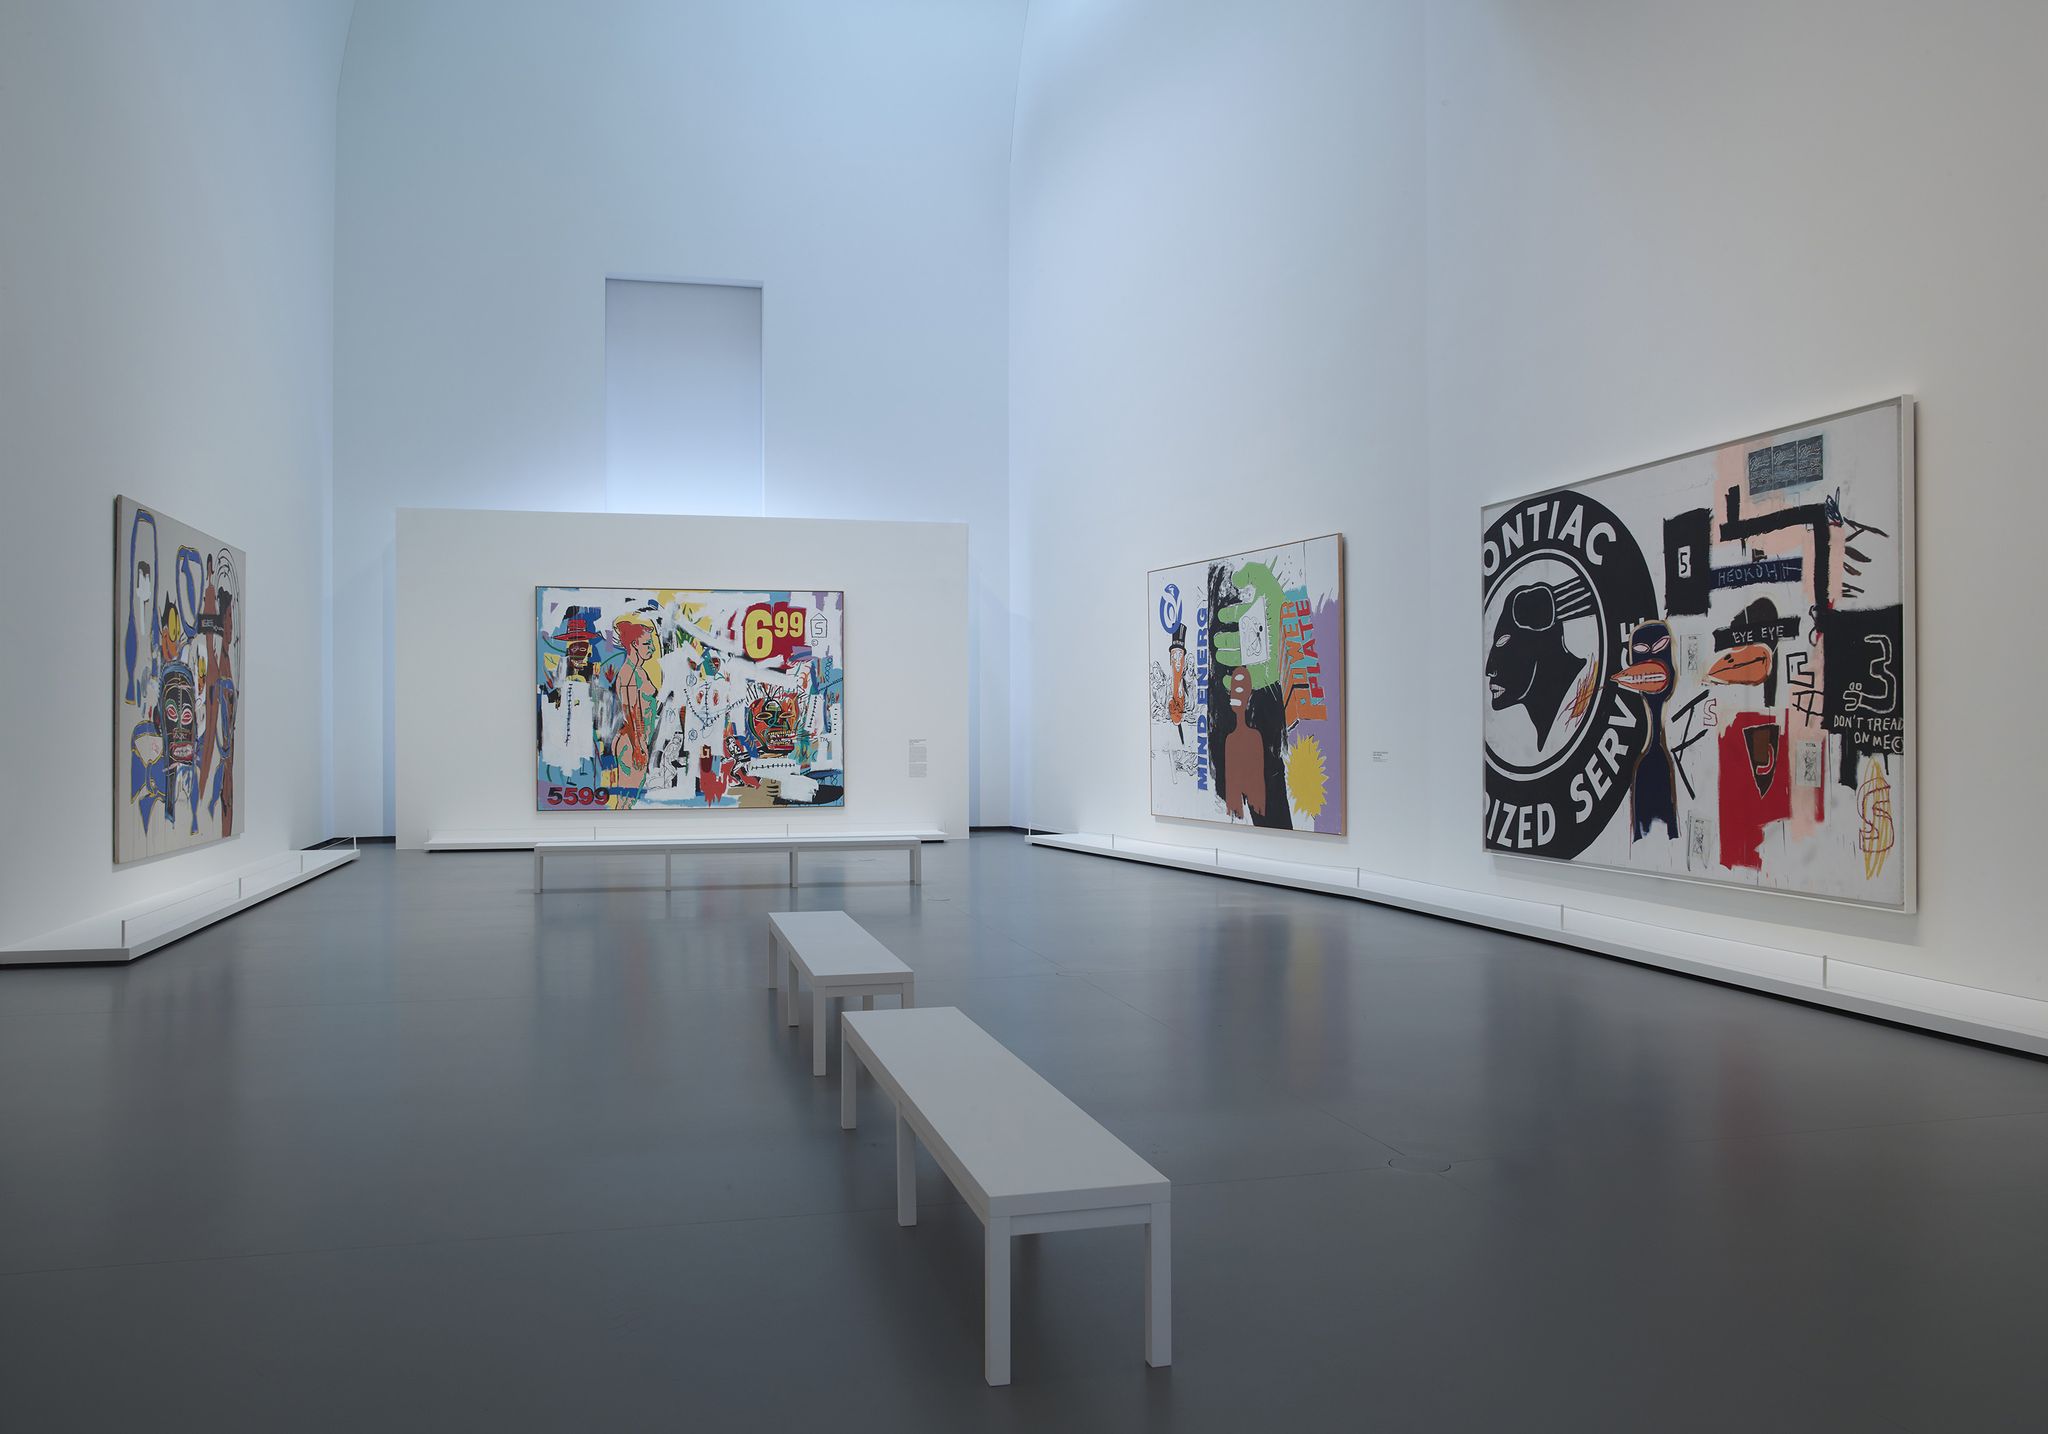 basquiat is in the spotlight at the fondation louis vuitton